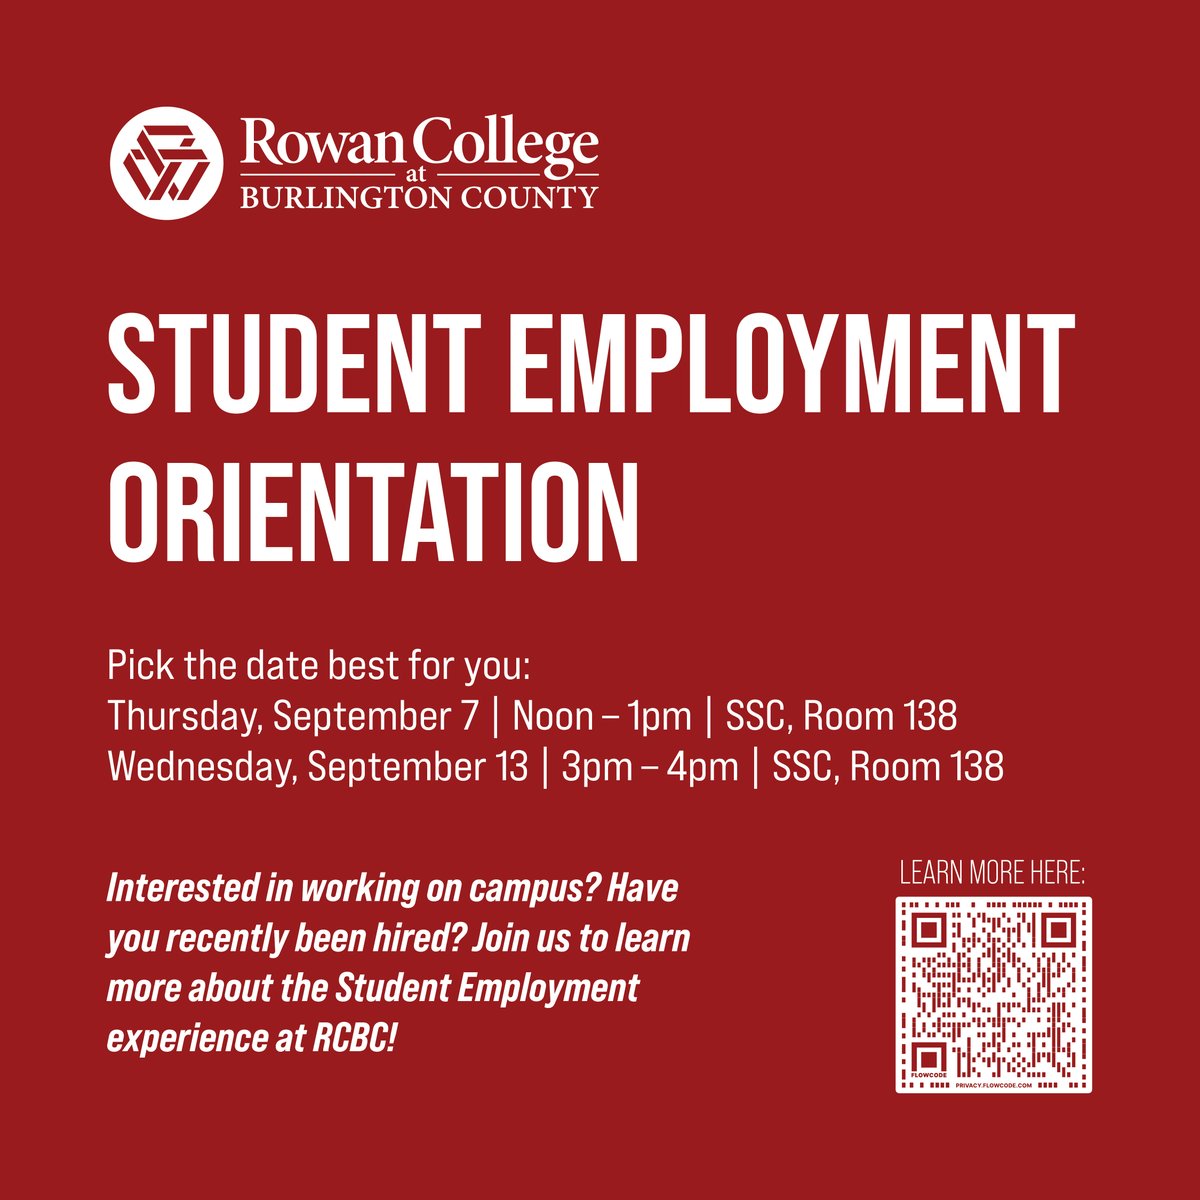 Interested in working on campus? Recently been hired? Join us for Student Employment Orientation and we will review how to apply and the ins & outs of the student employment process! #StudentWorker #StudentEmployment